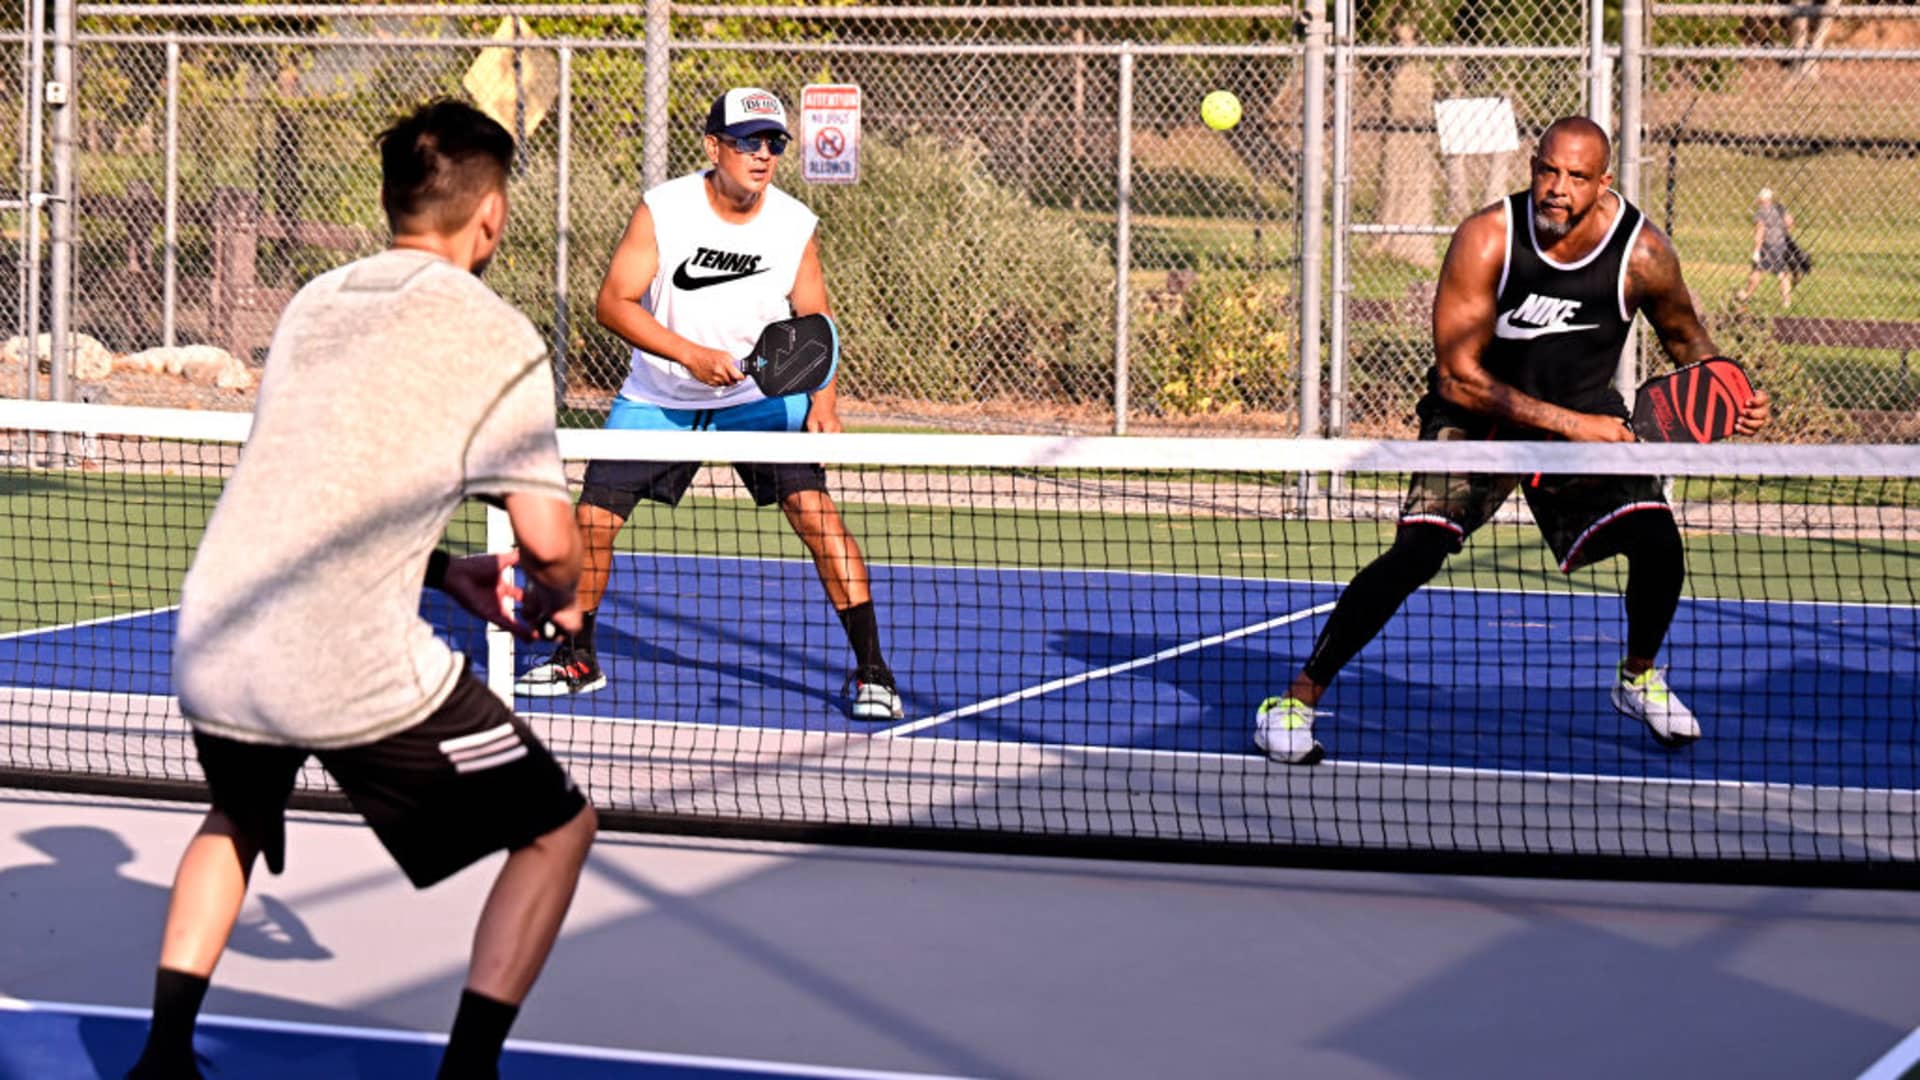 Pickleball popularity explodes, with more than 36 million playing | Photo Credit: CNBC